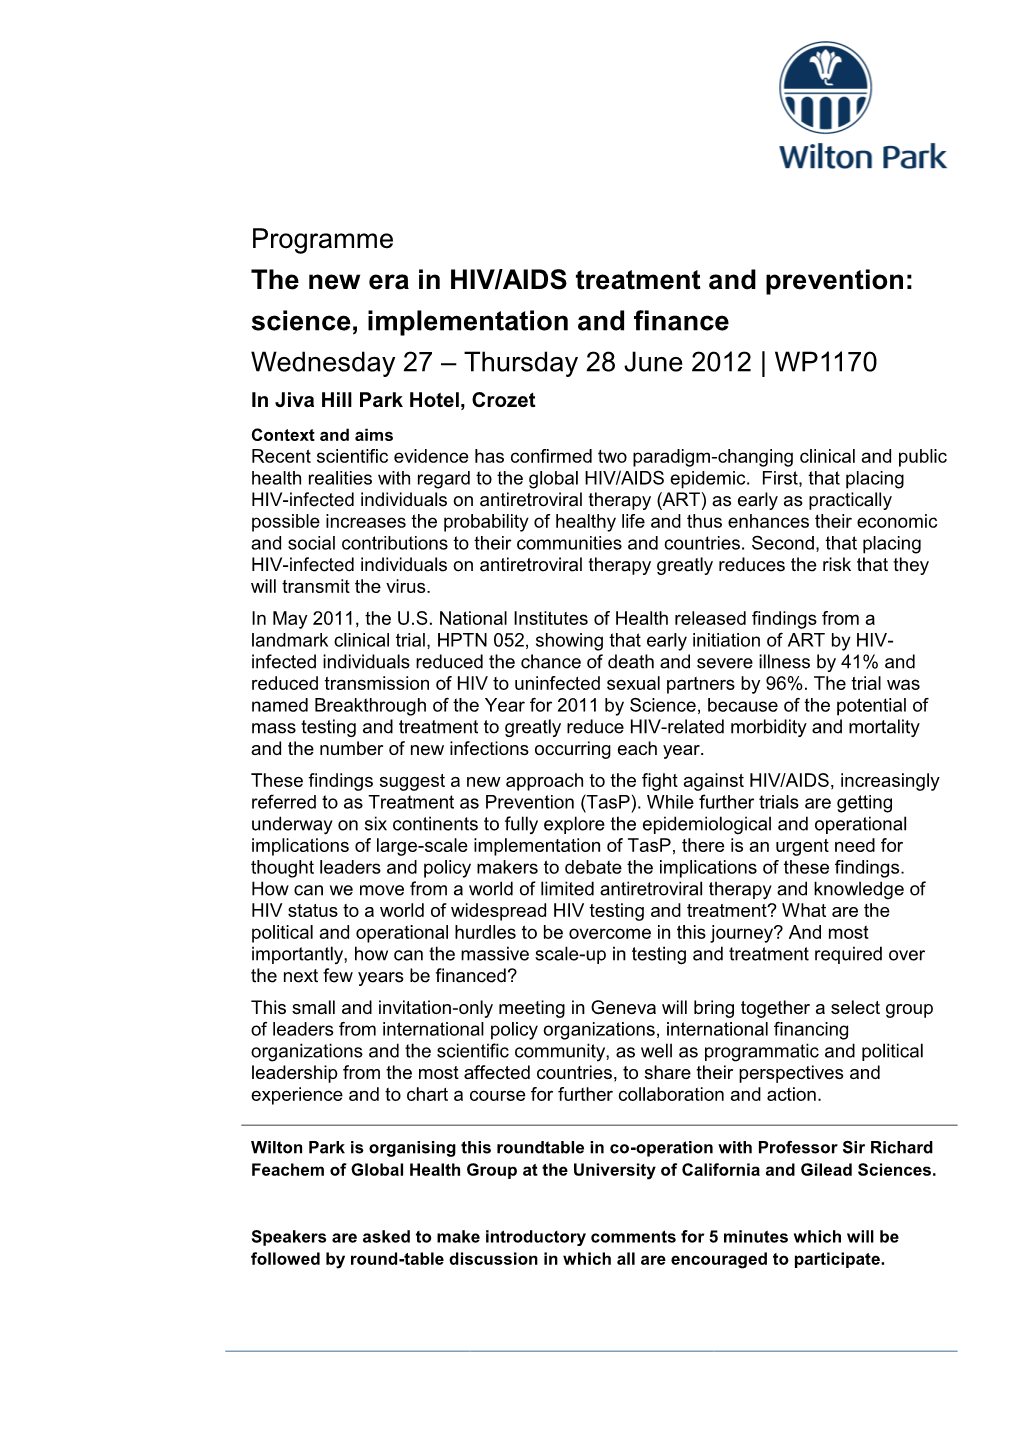 The New Era in HIV/AIDS Treatment and Prevention